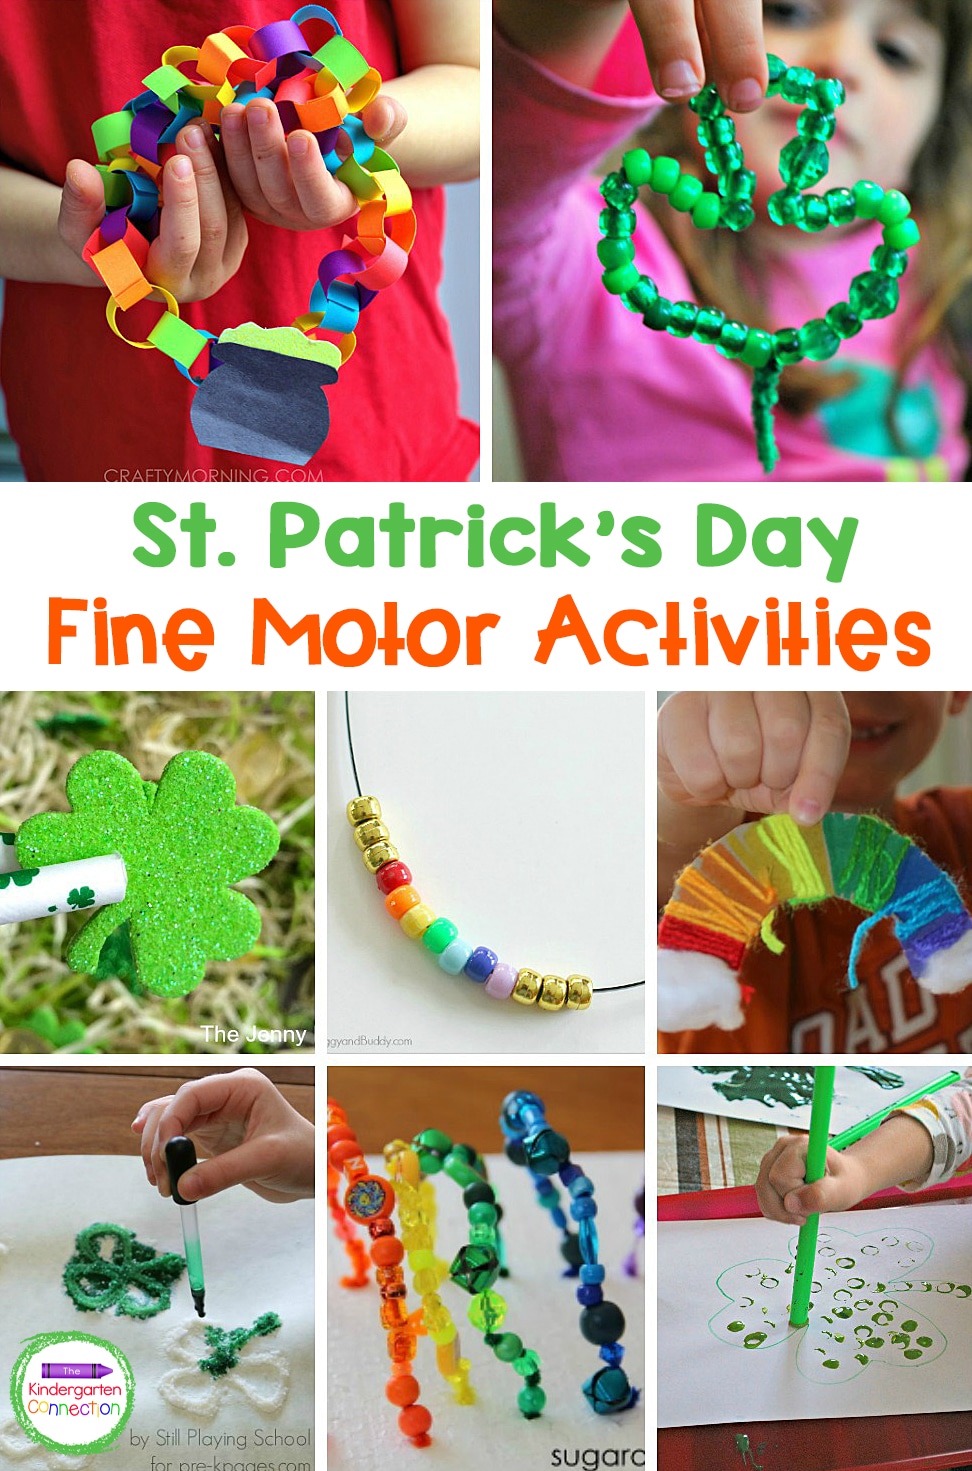 Build up fine motor skills and have a blast learning this March with these hands-on and fun St. Patrick's Day fine motor activities for kids!